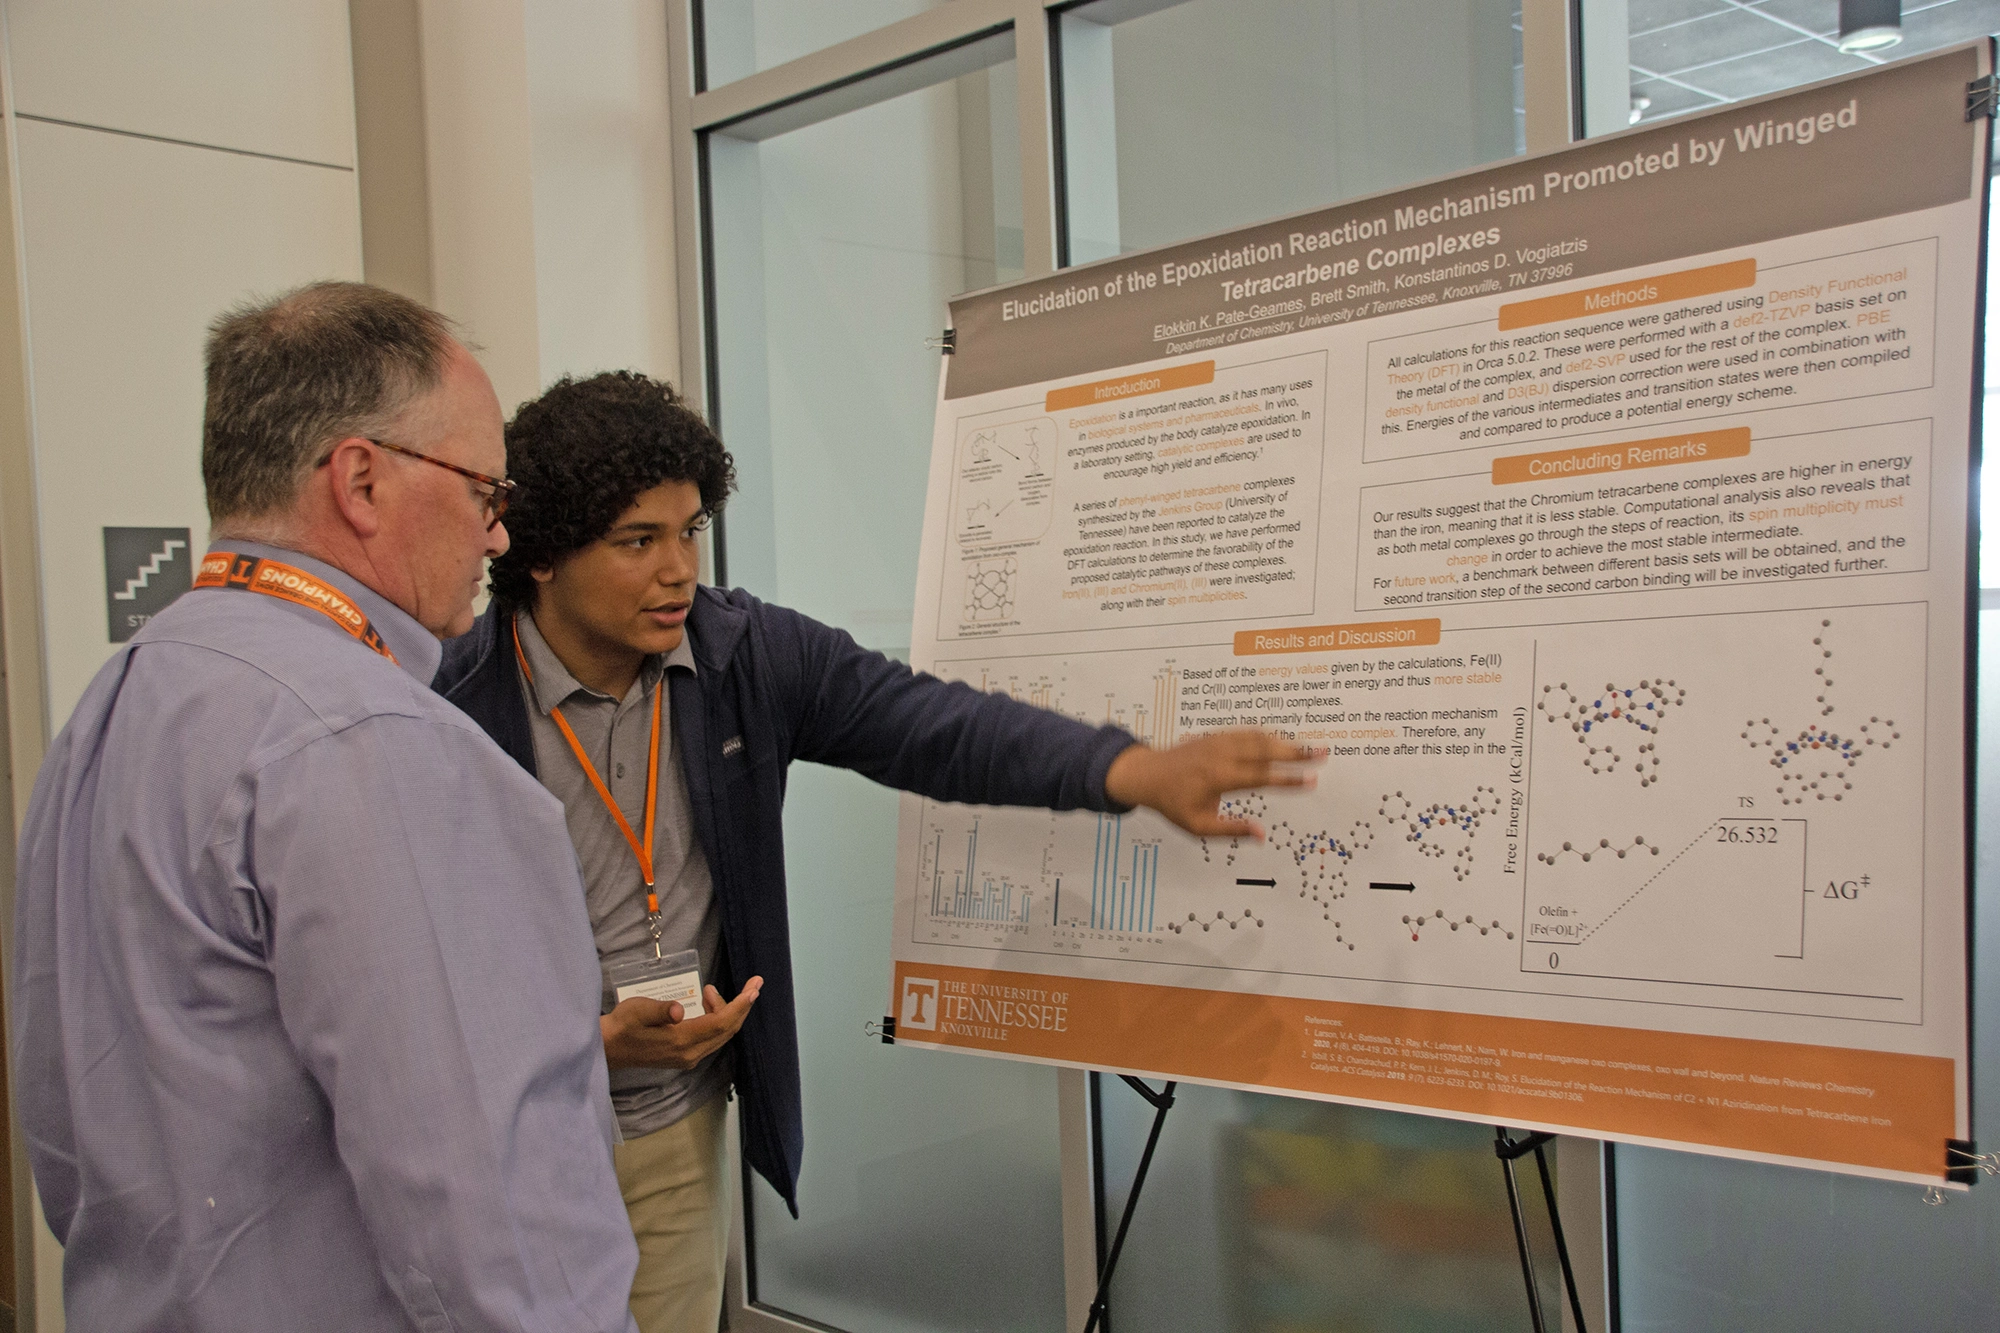 A student talking with a professor points at a research poster